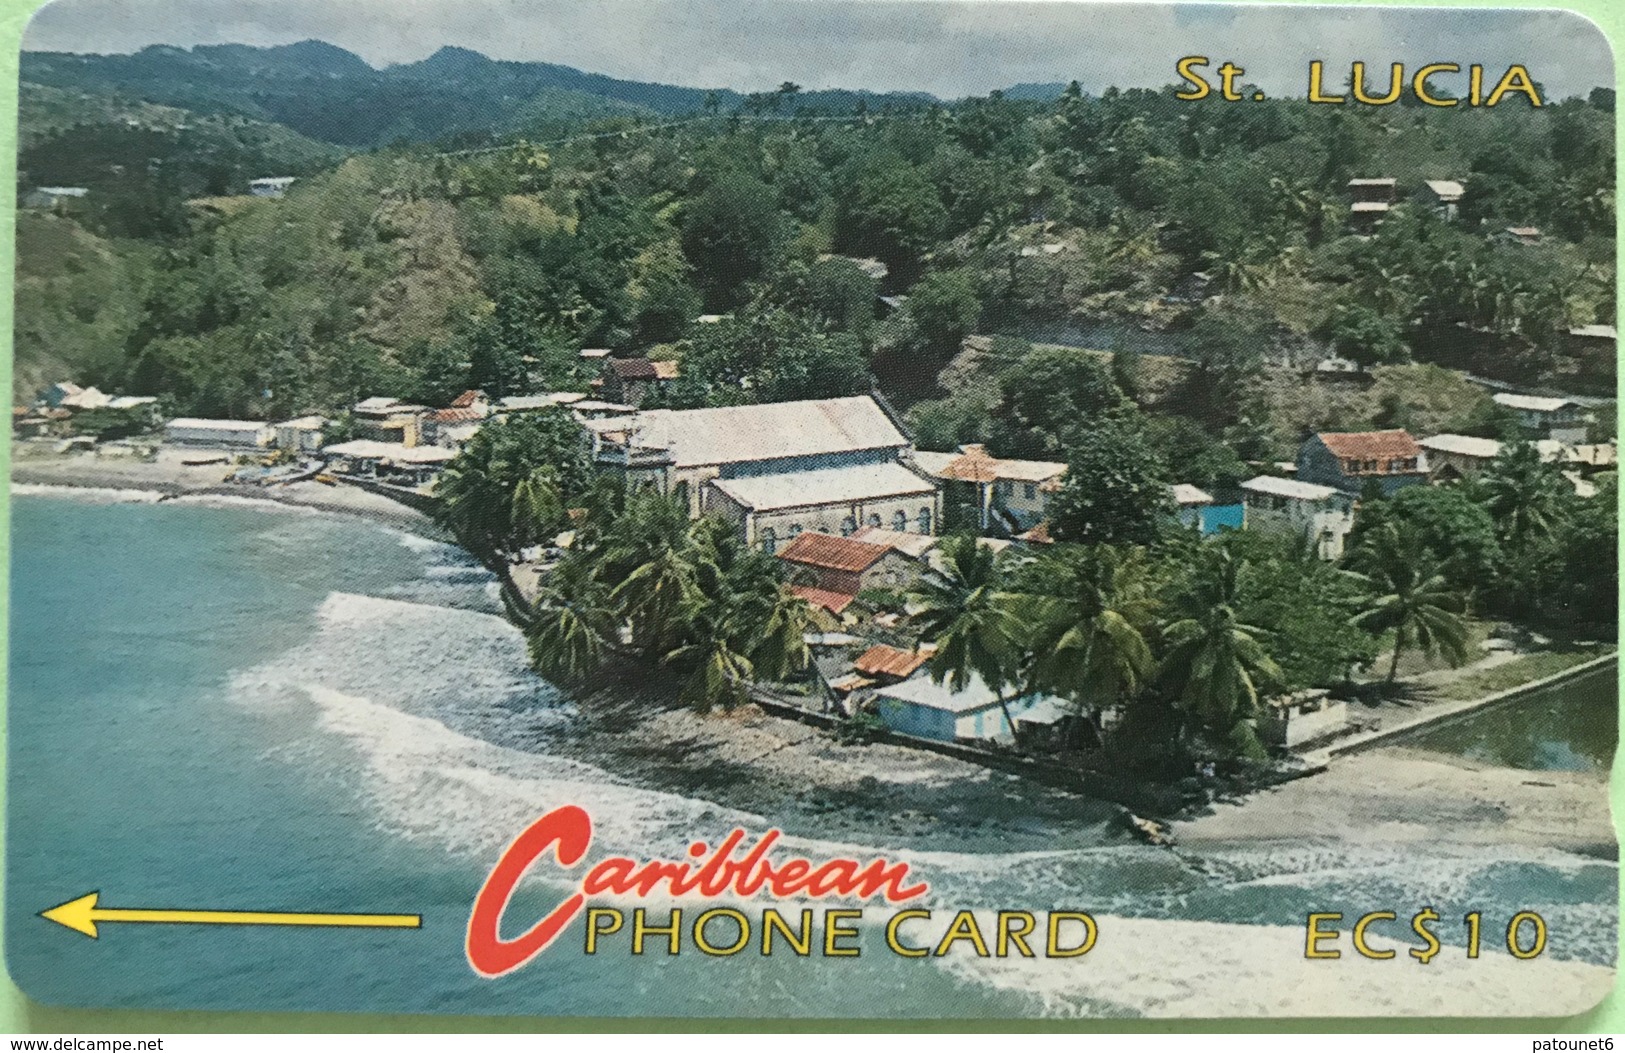 SAINTE LUCIE  -  Phonecard  - Cable & Wireless  -  EC $ 10 - St. Lucia